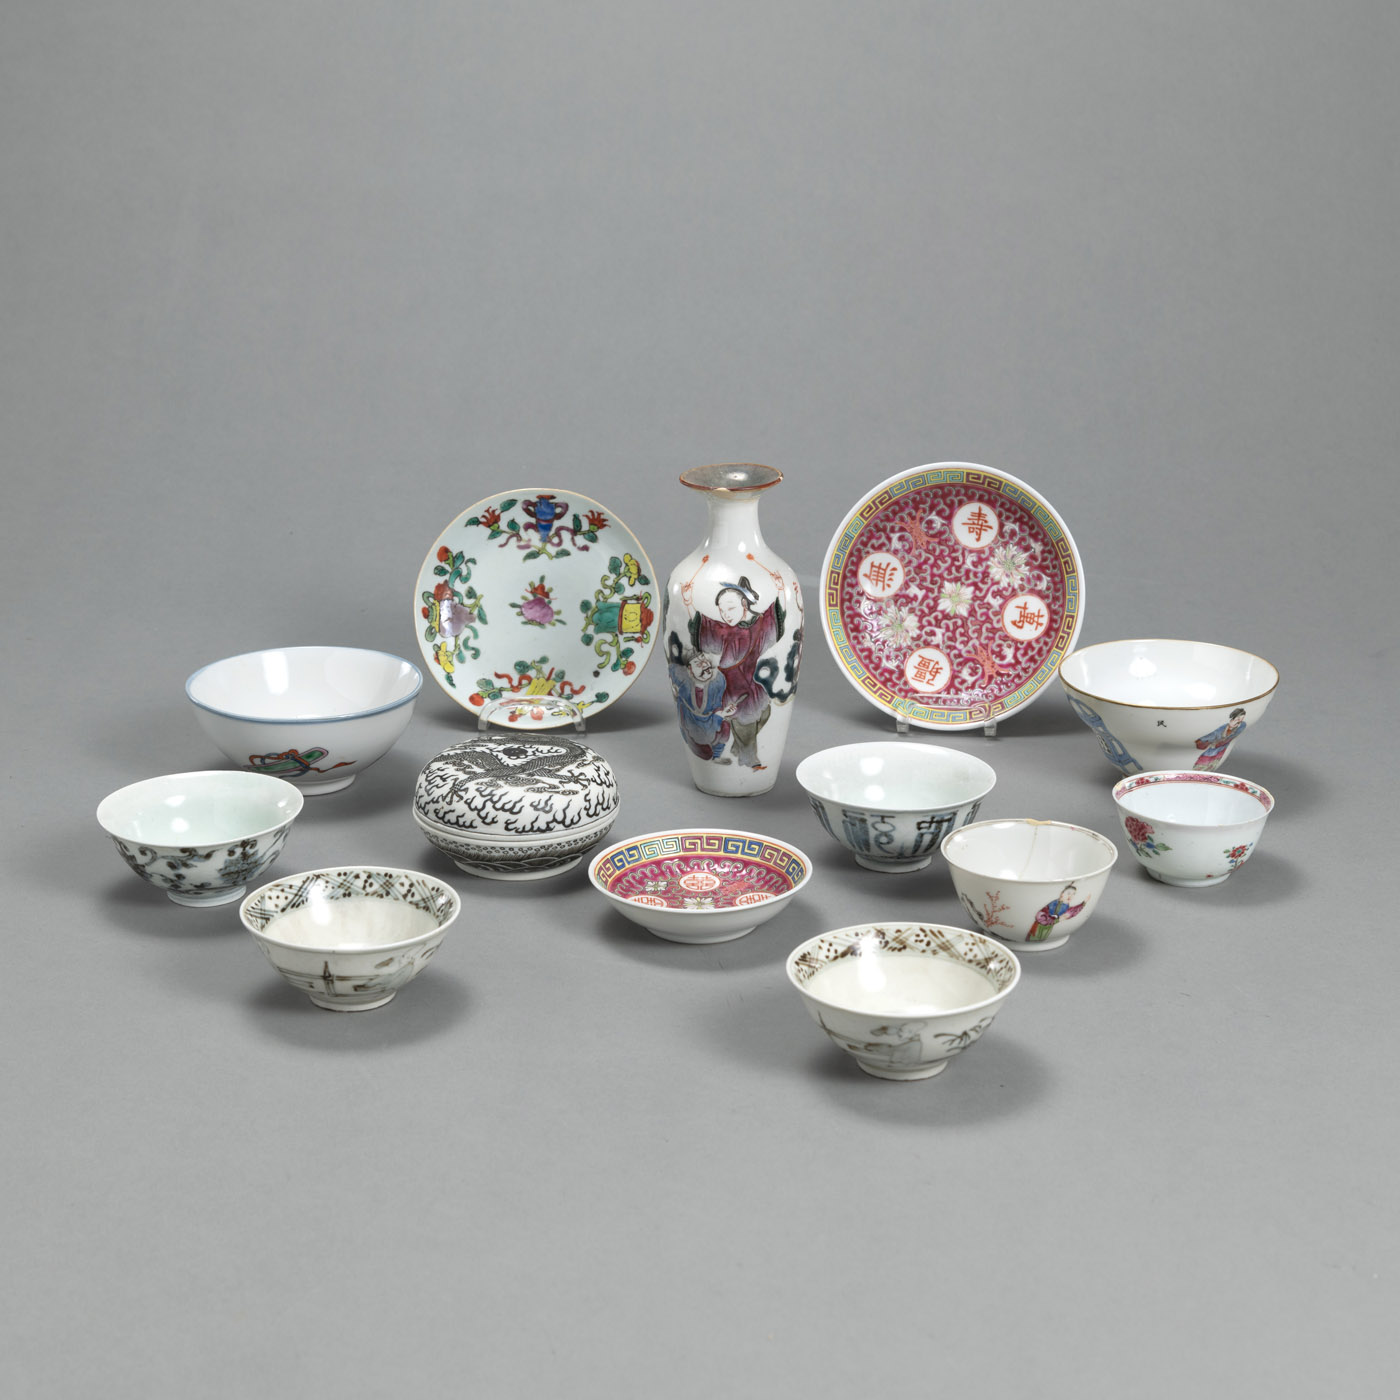 <b>A GROUP OF POLYCHROME PORCELAIN BOWLS AND A BISCUIT DRAGON BOX WITH COVER</b>